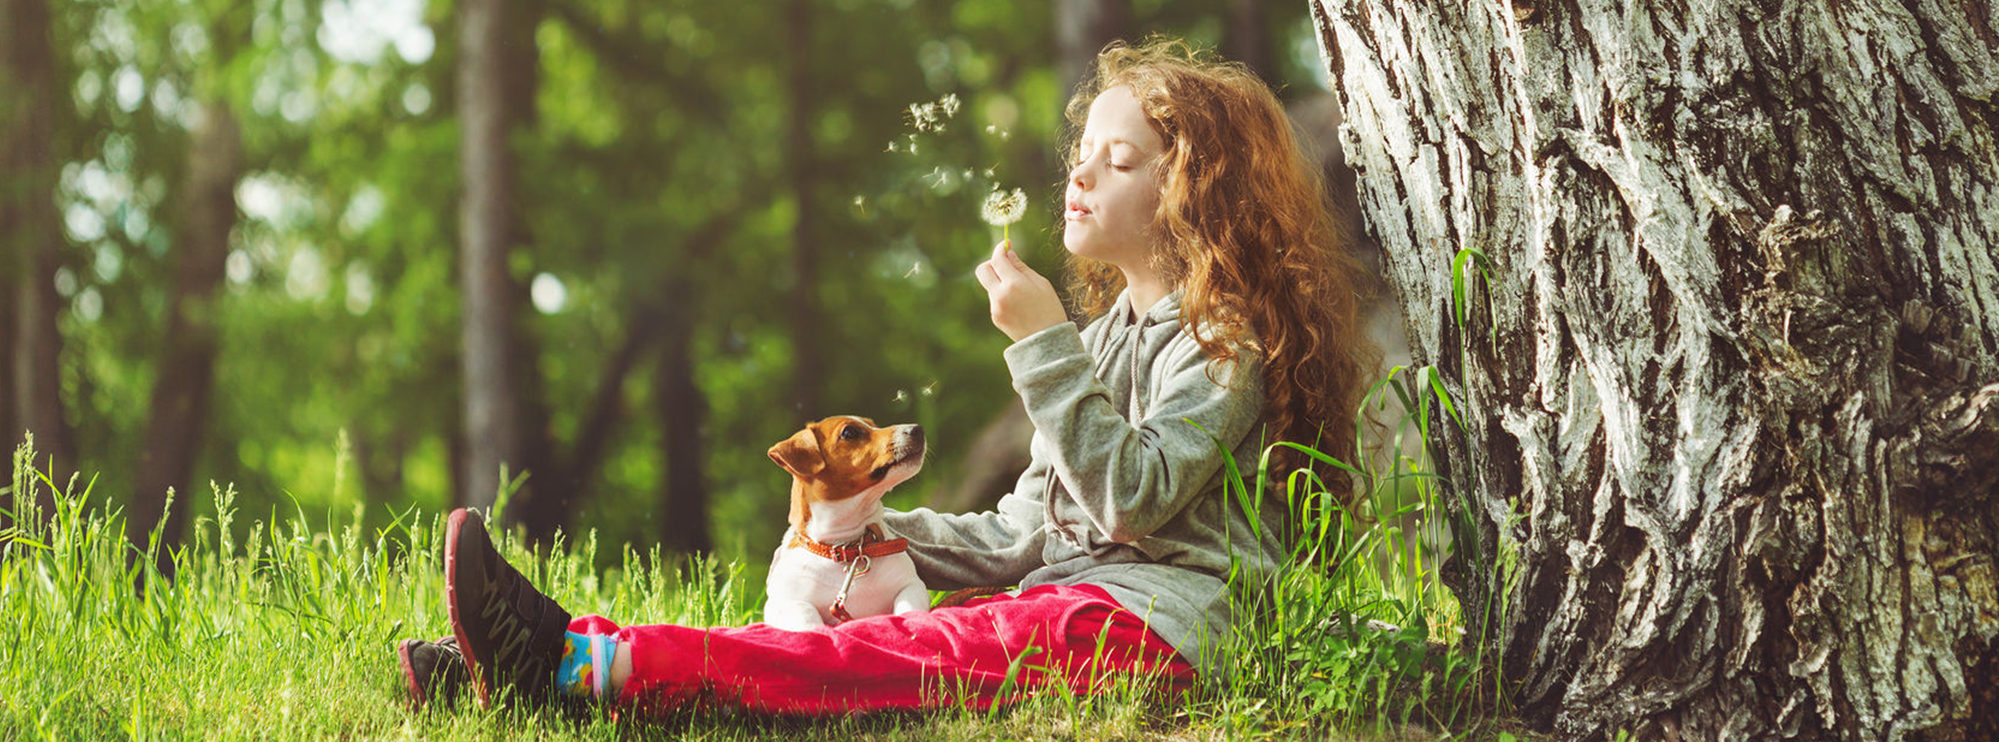 Slider Image: Little Girl with Cute Dog